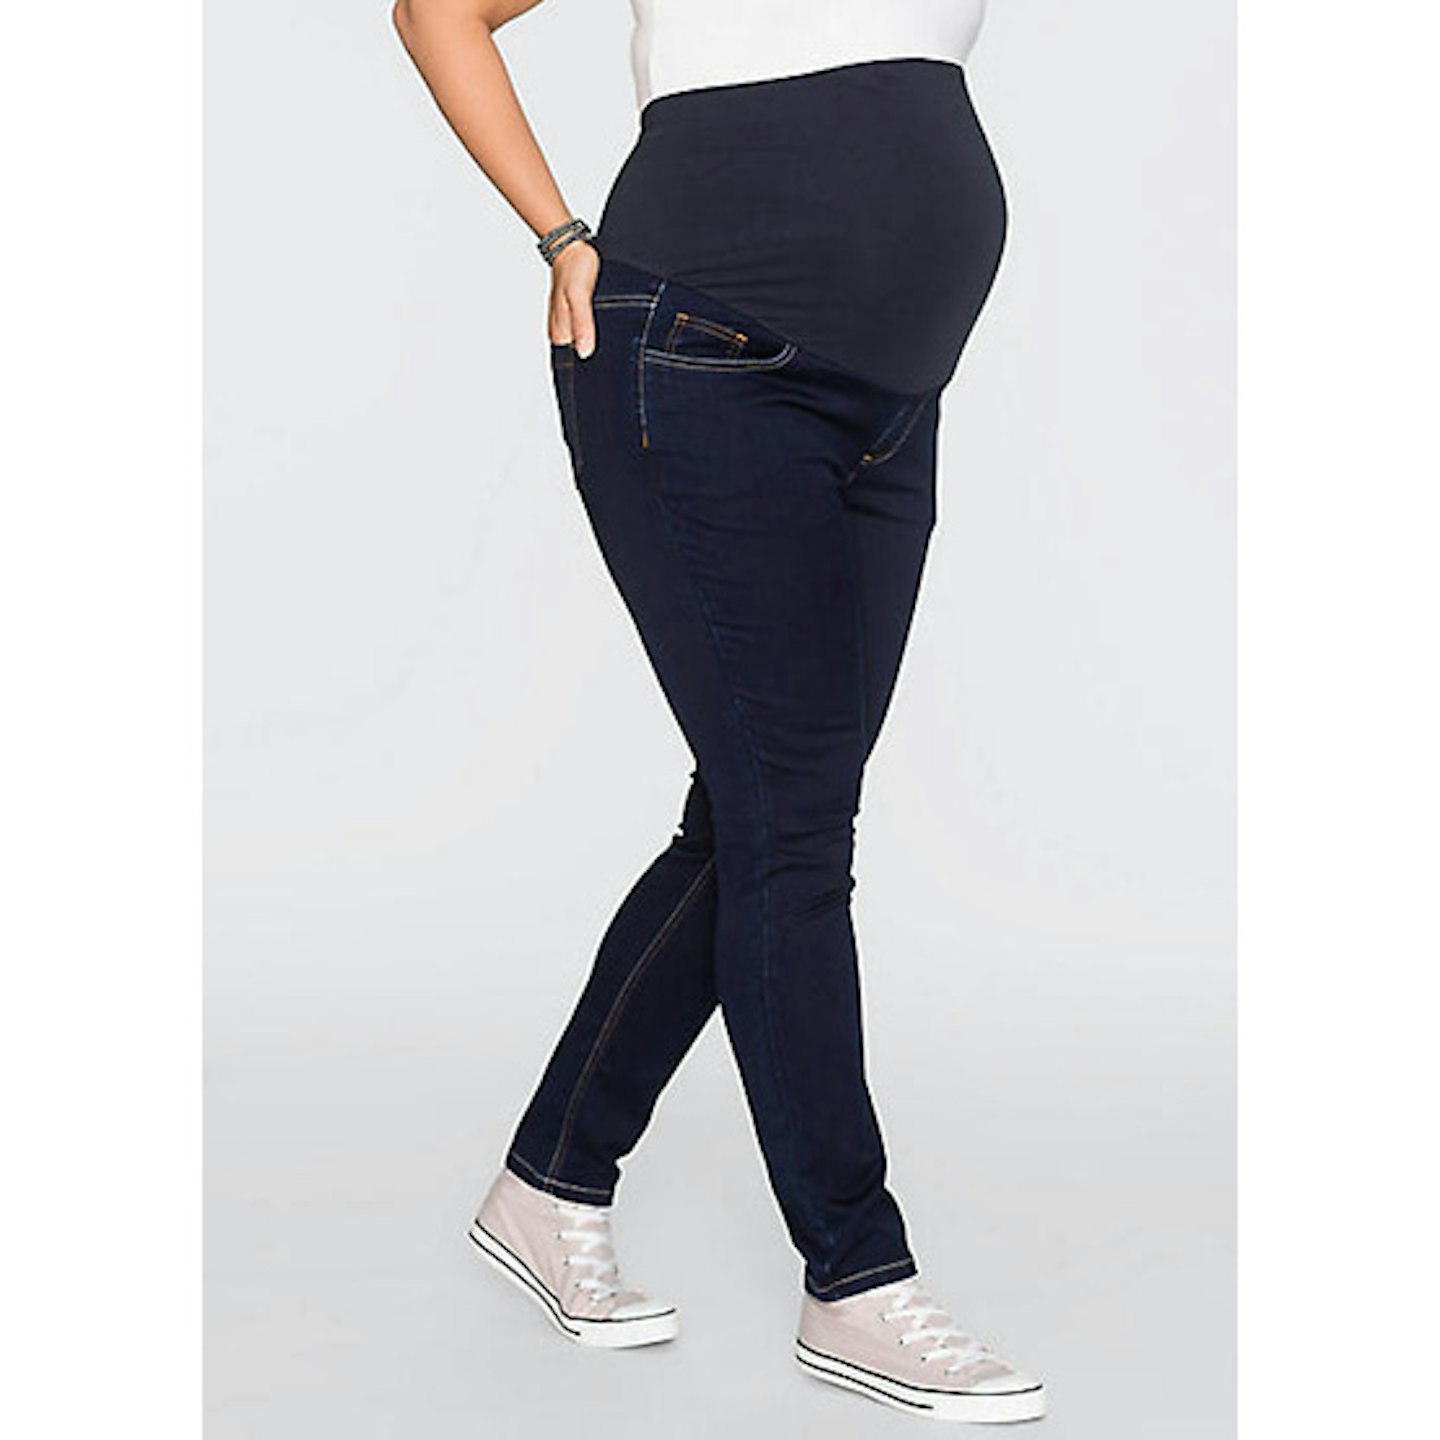 Maternity Skinny Jeans- plus size maternity clothes